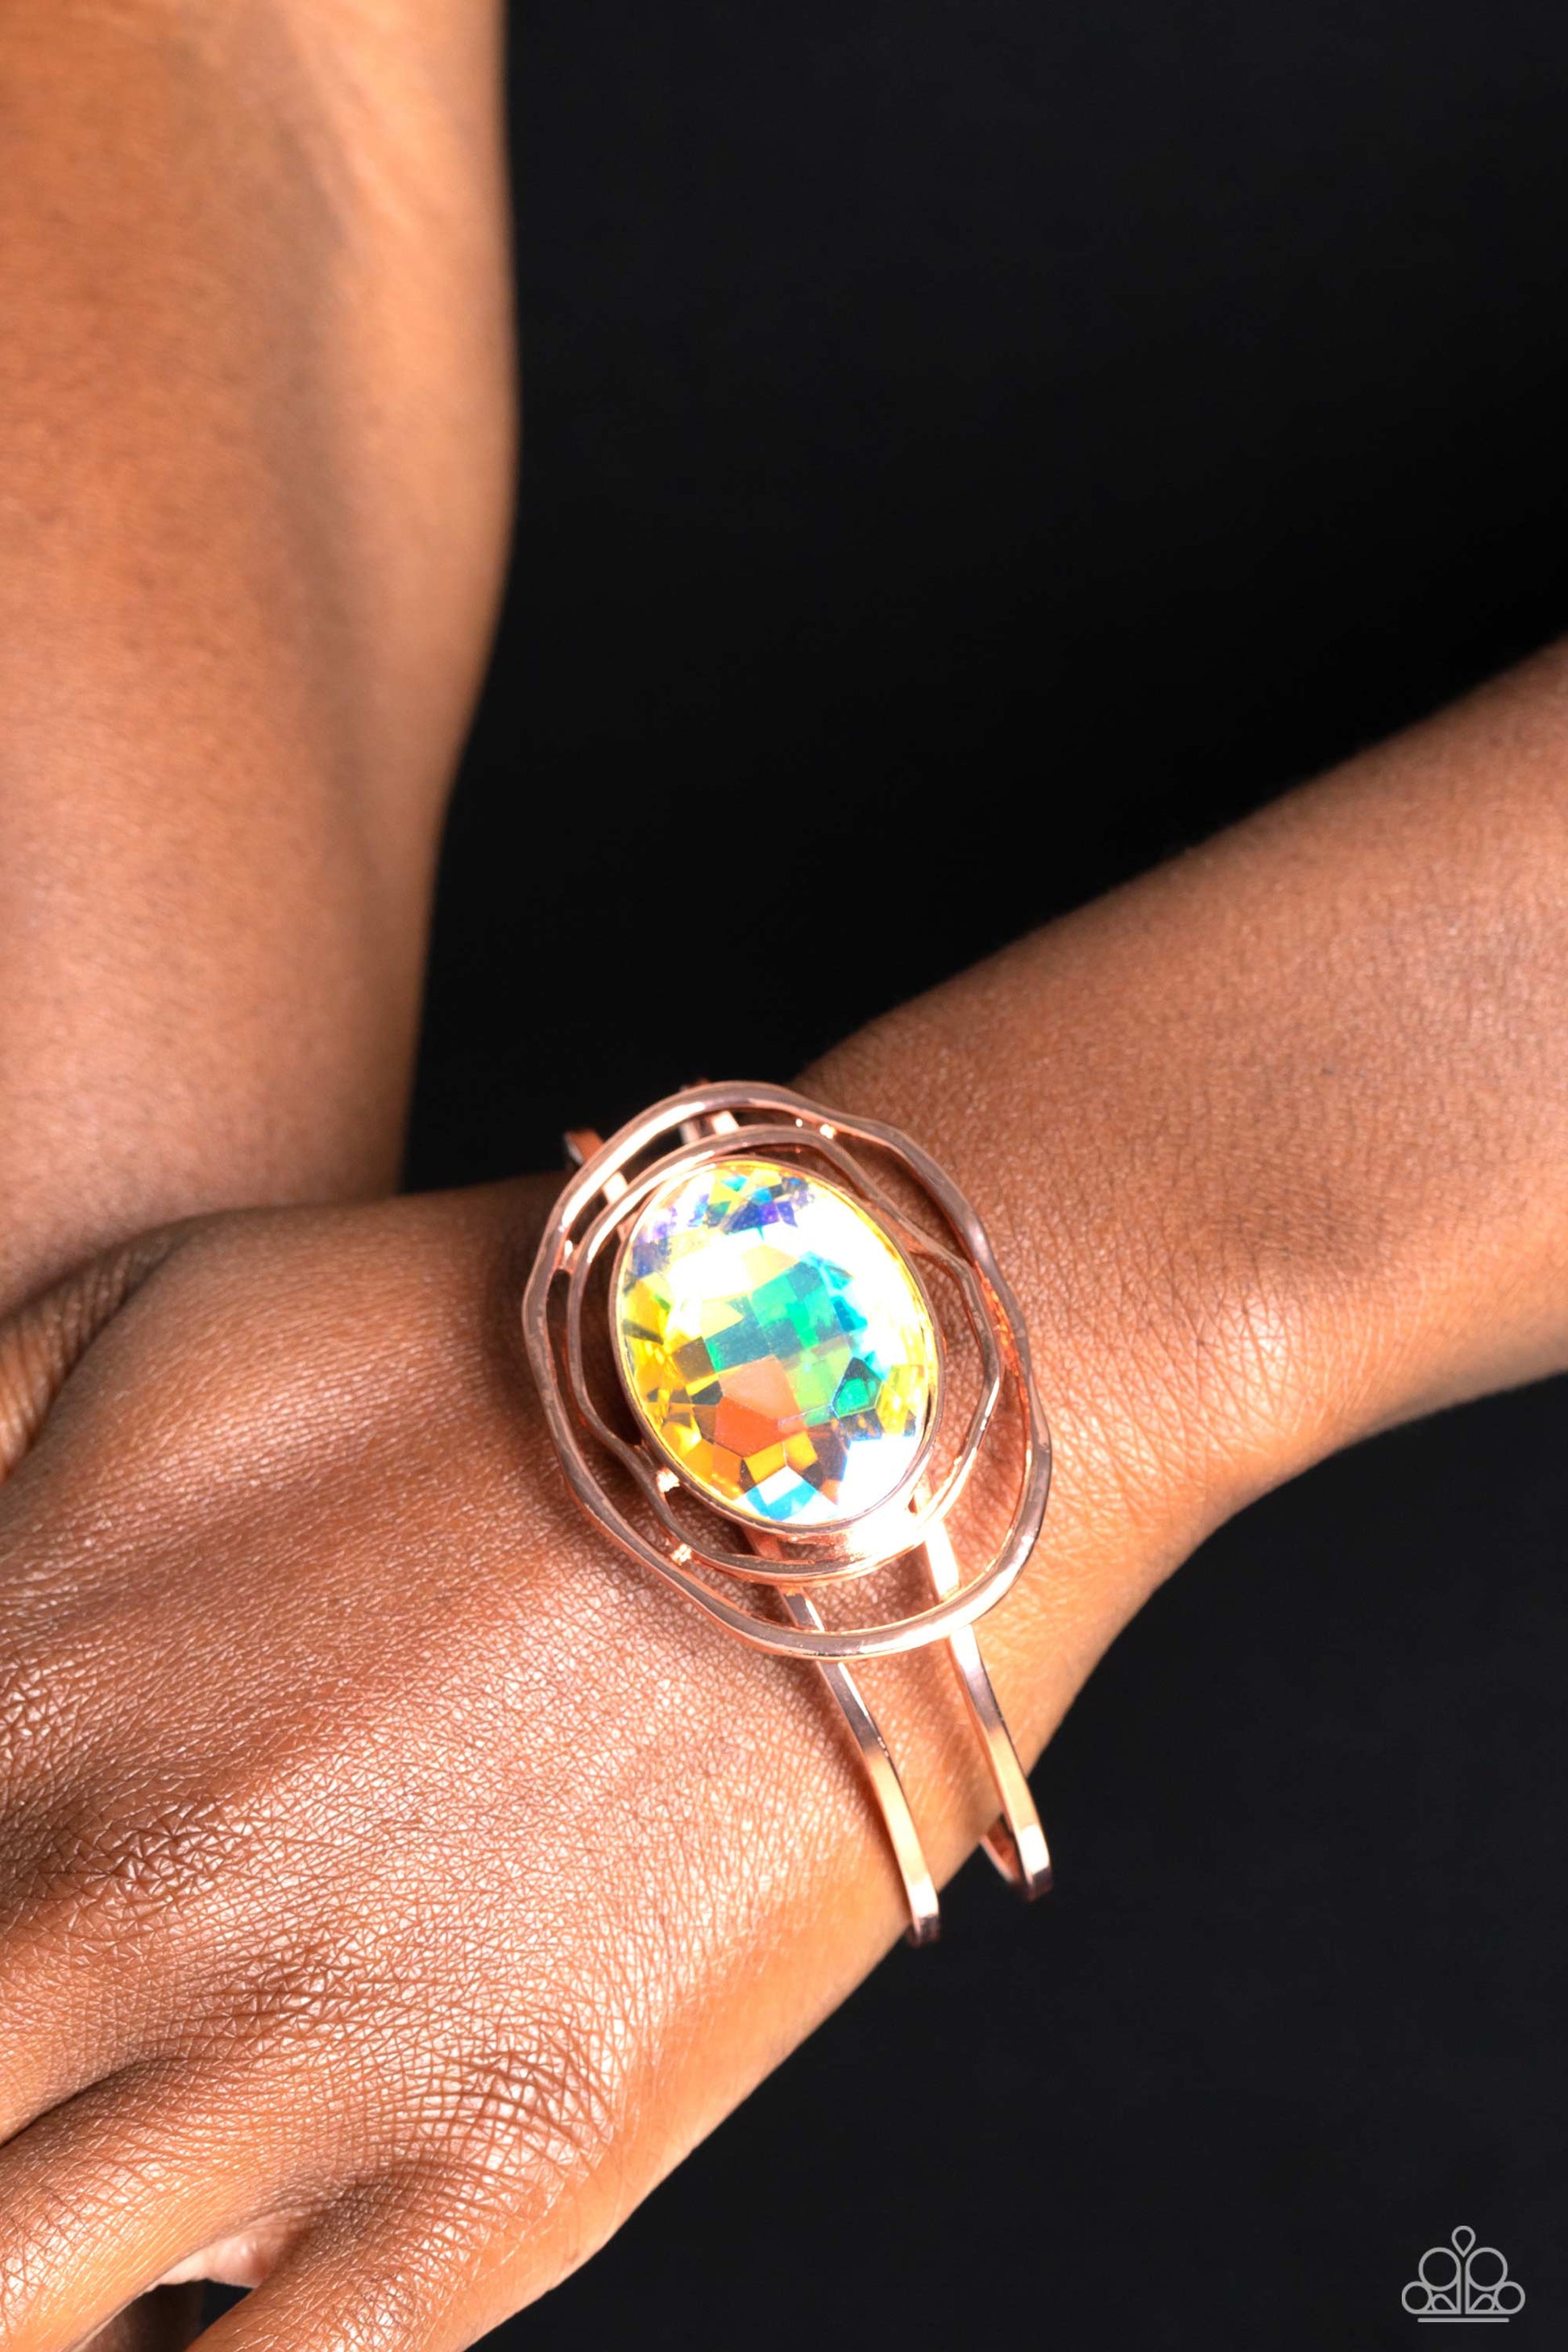 Paparazzi Accessories Substantial Sorceress - Copper Featured in the center of airy, shiny copper bands, an oversized, faceted iridescent oval gem rests atop the wrist for a dazzling pop of color. Warped, shiny copper rings seemingly float around the spar